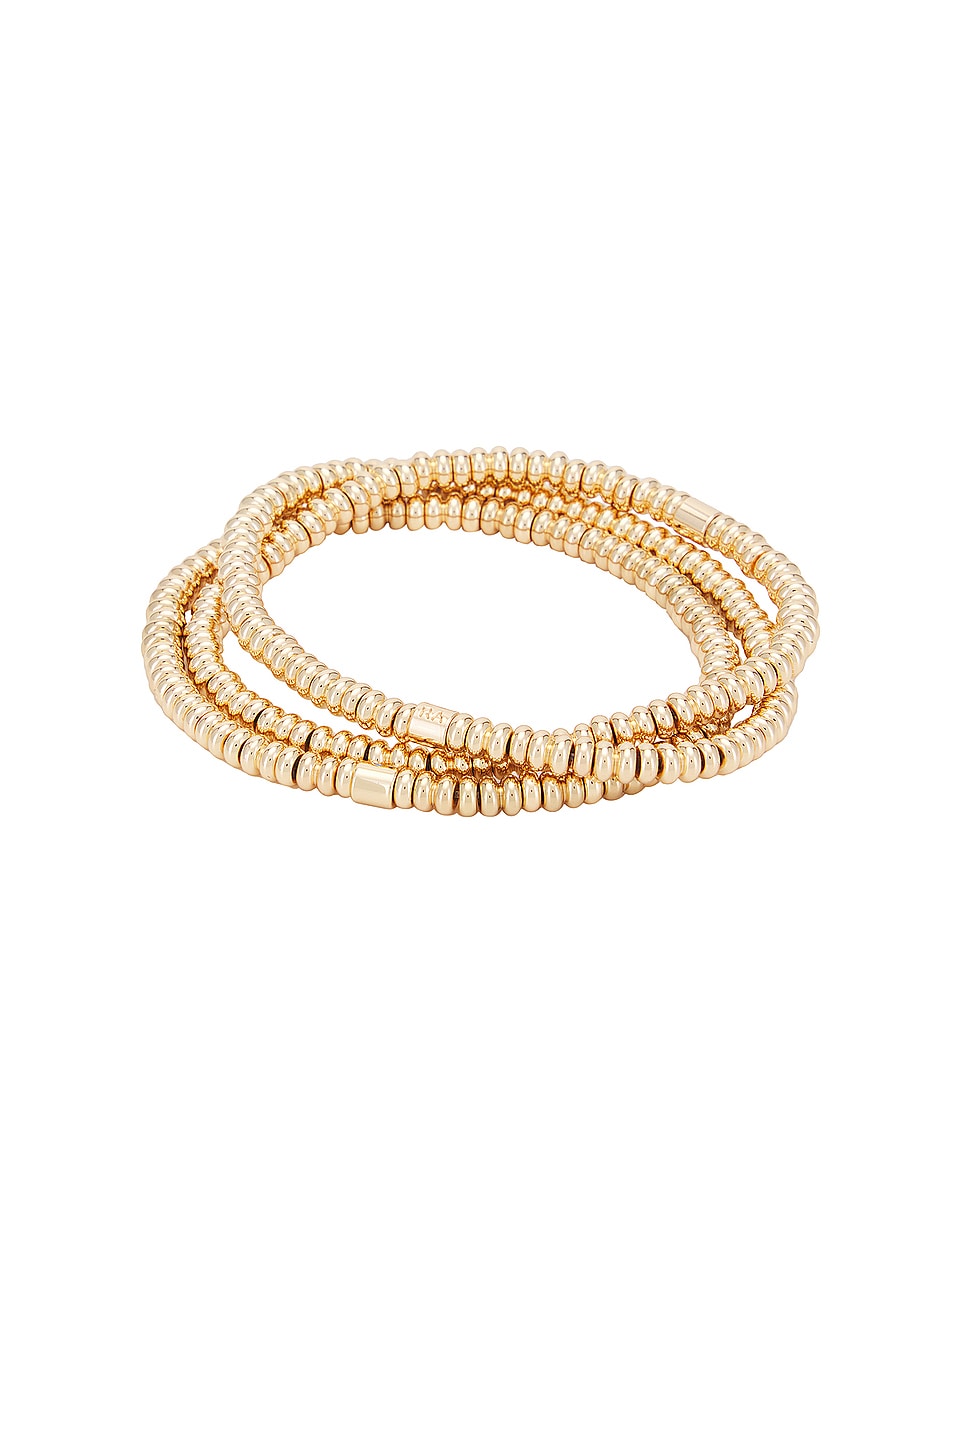 Image 1 of Roxanne Assoulin The Corduroy Bunch Set Of 3 Bracelets in Shiny Gold